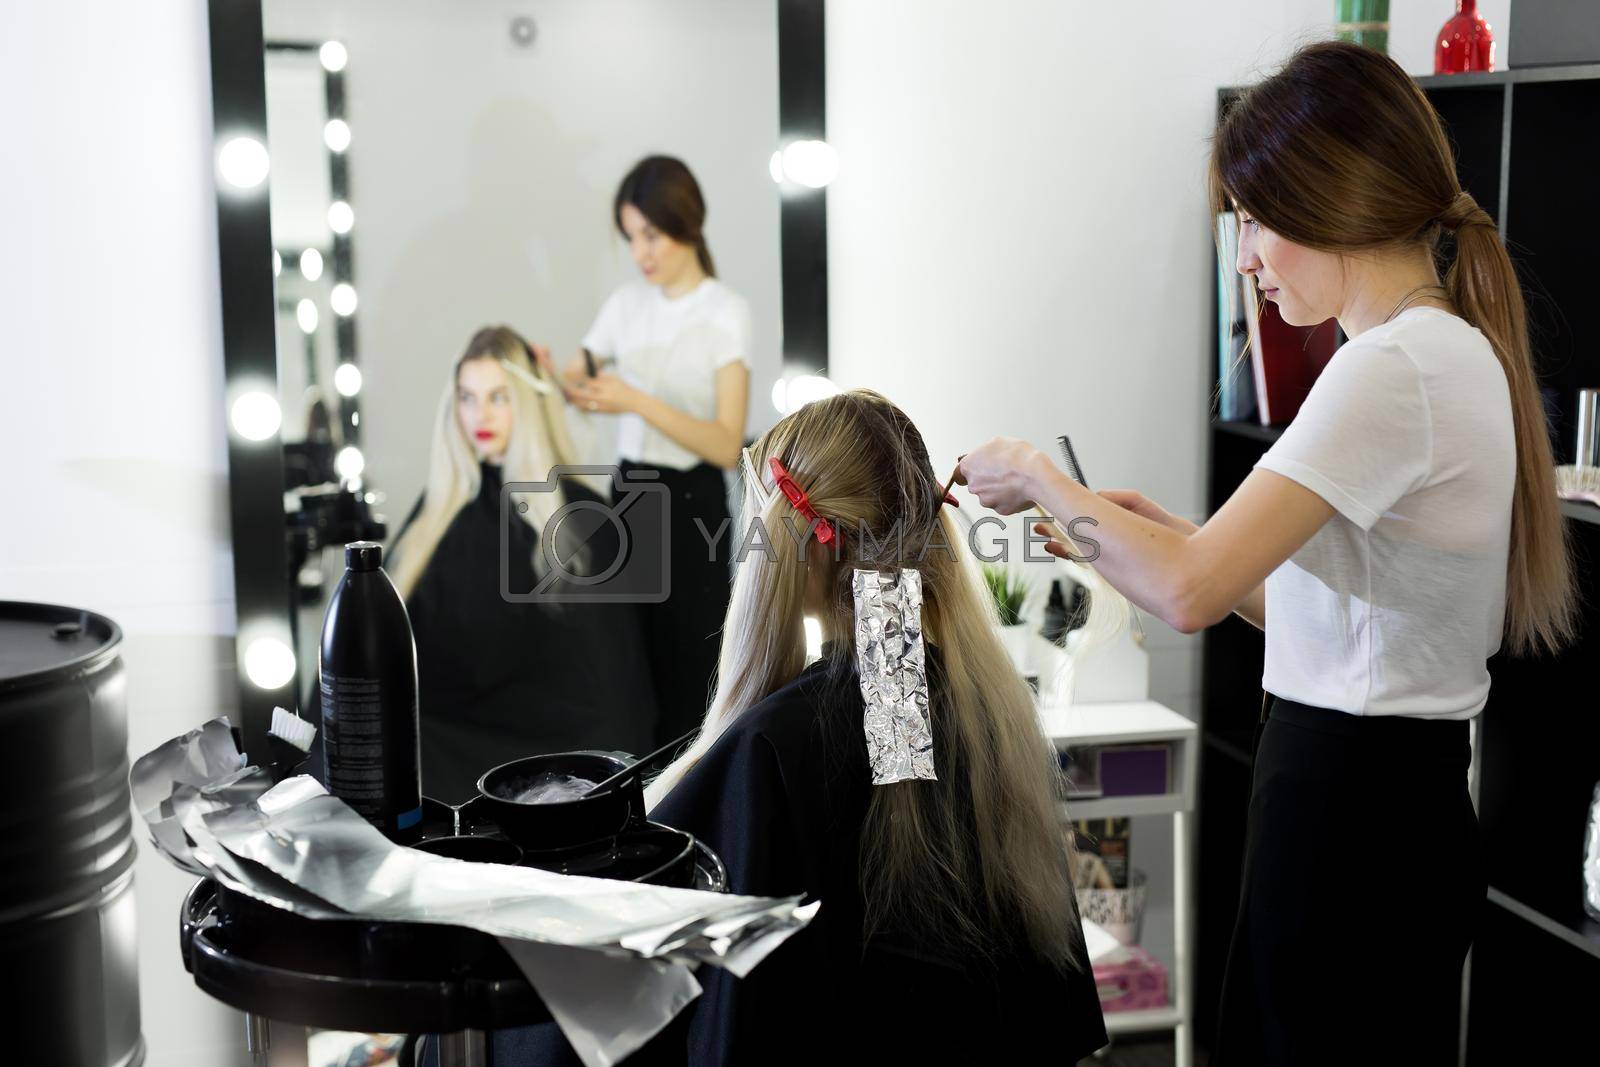 Blonde woman dying her hair at the beauty salon